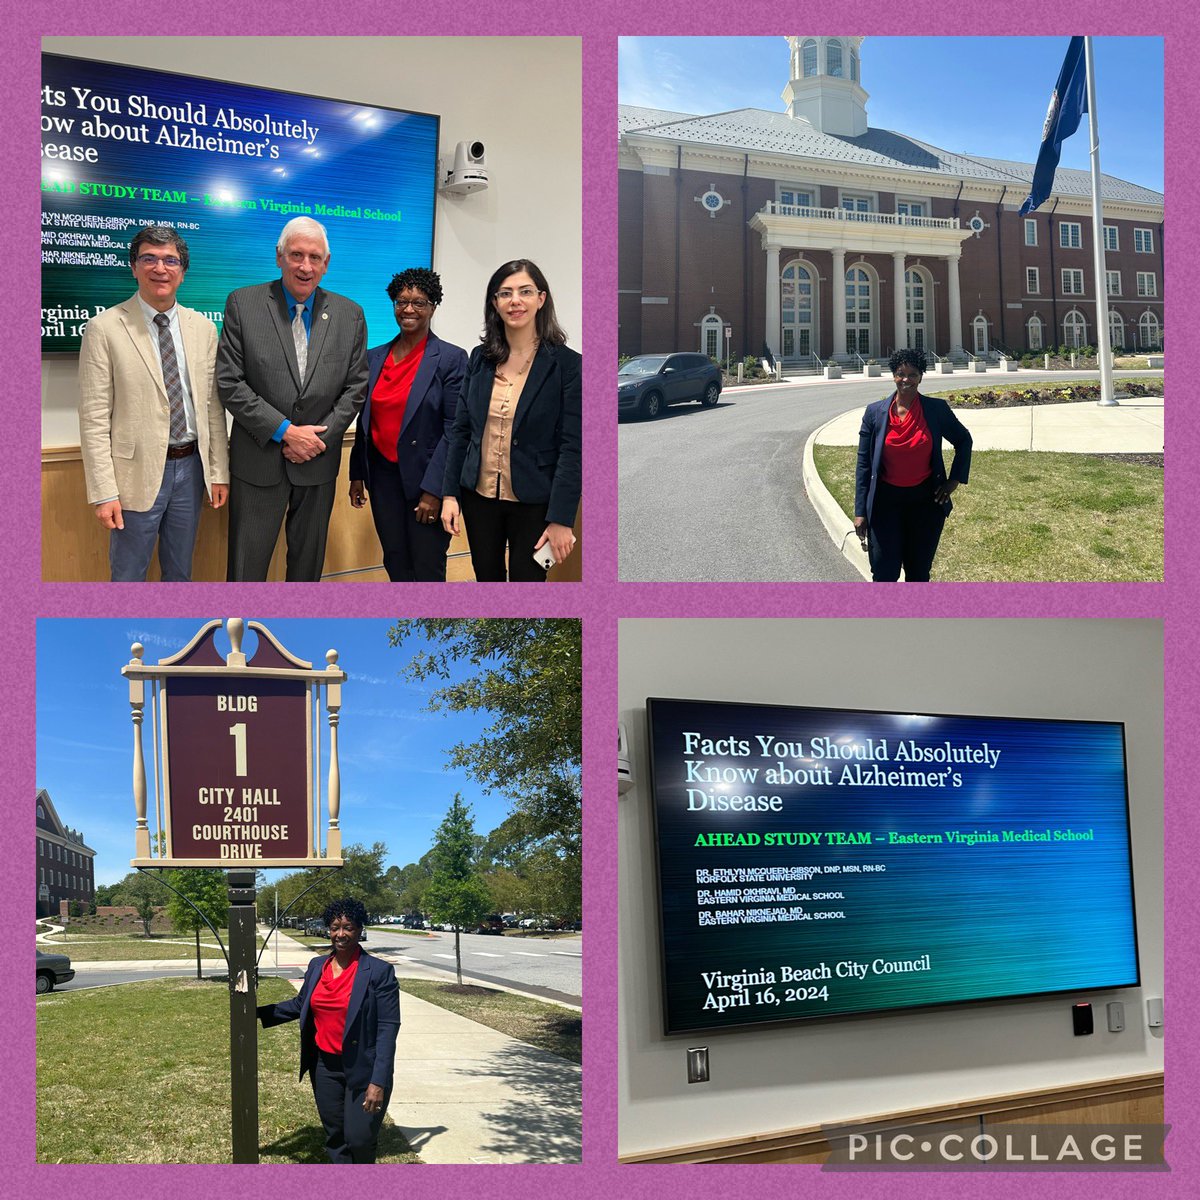 EVMS Research Team educating in the community about Alzheimer’s Dementia during the Virginia Beach City Council Meeting, thank you for the invitation Councilwoman Jennifer Rouse and the warm welcome from Mayor Dyer.@SGS_JAG @geronsociety